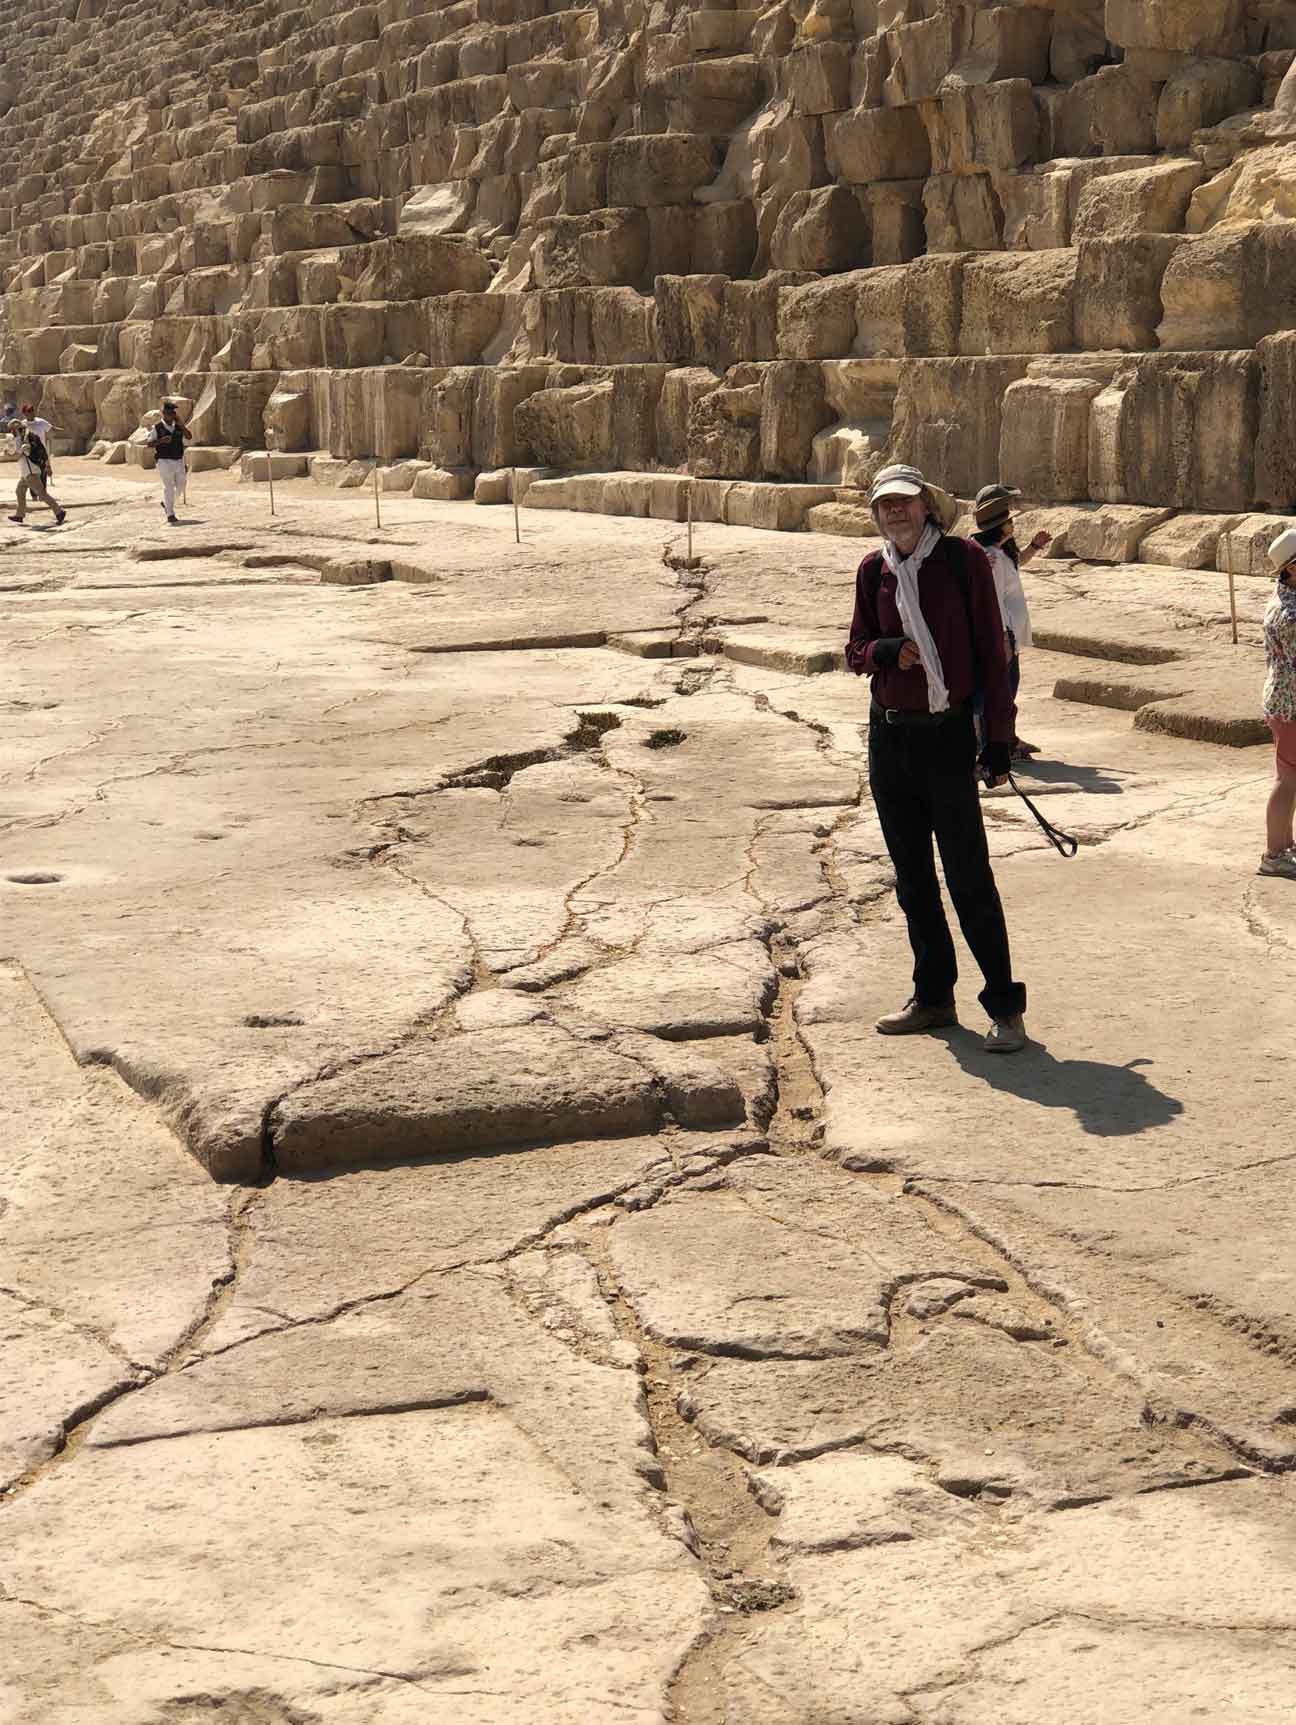 Robert Schoch standing in front of the Great Pyramid and near evidence of a lightning strike emanating from beneath it